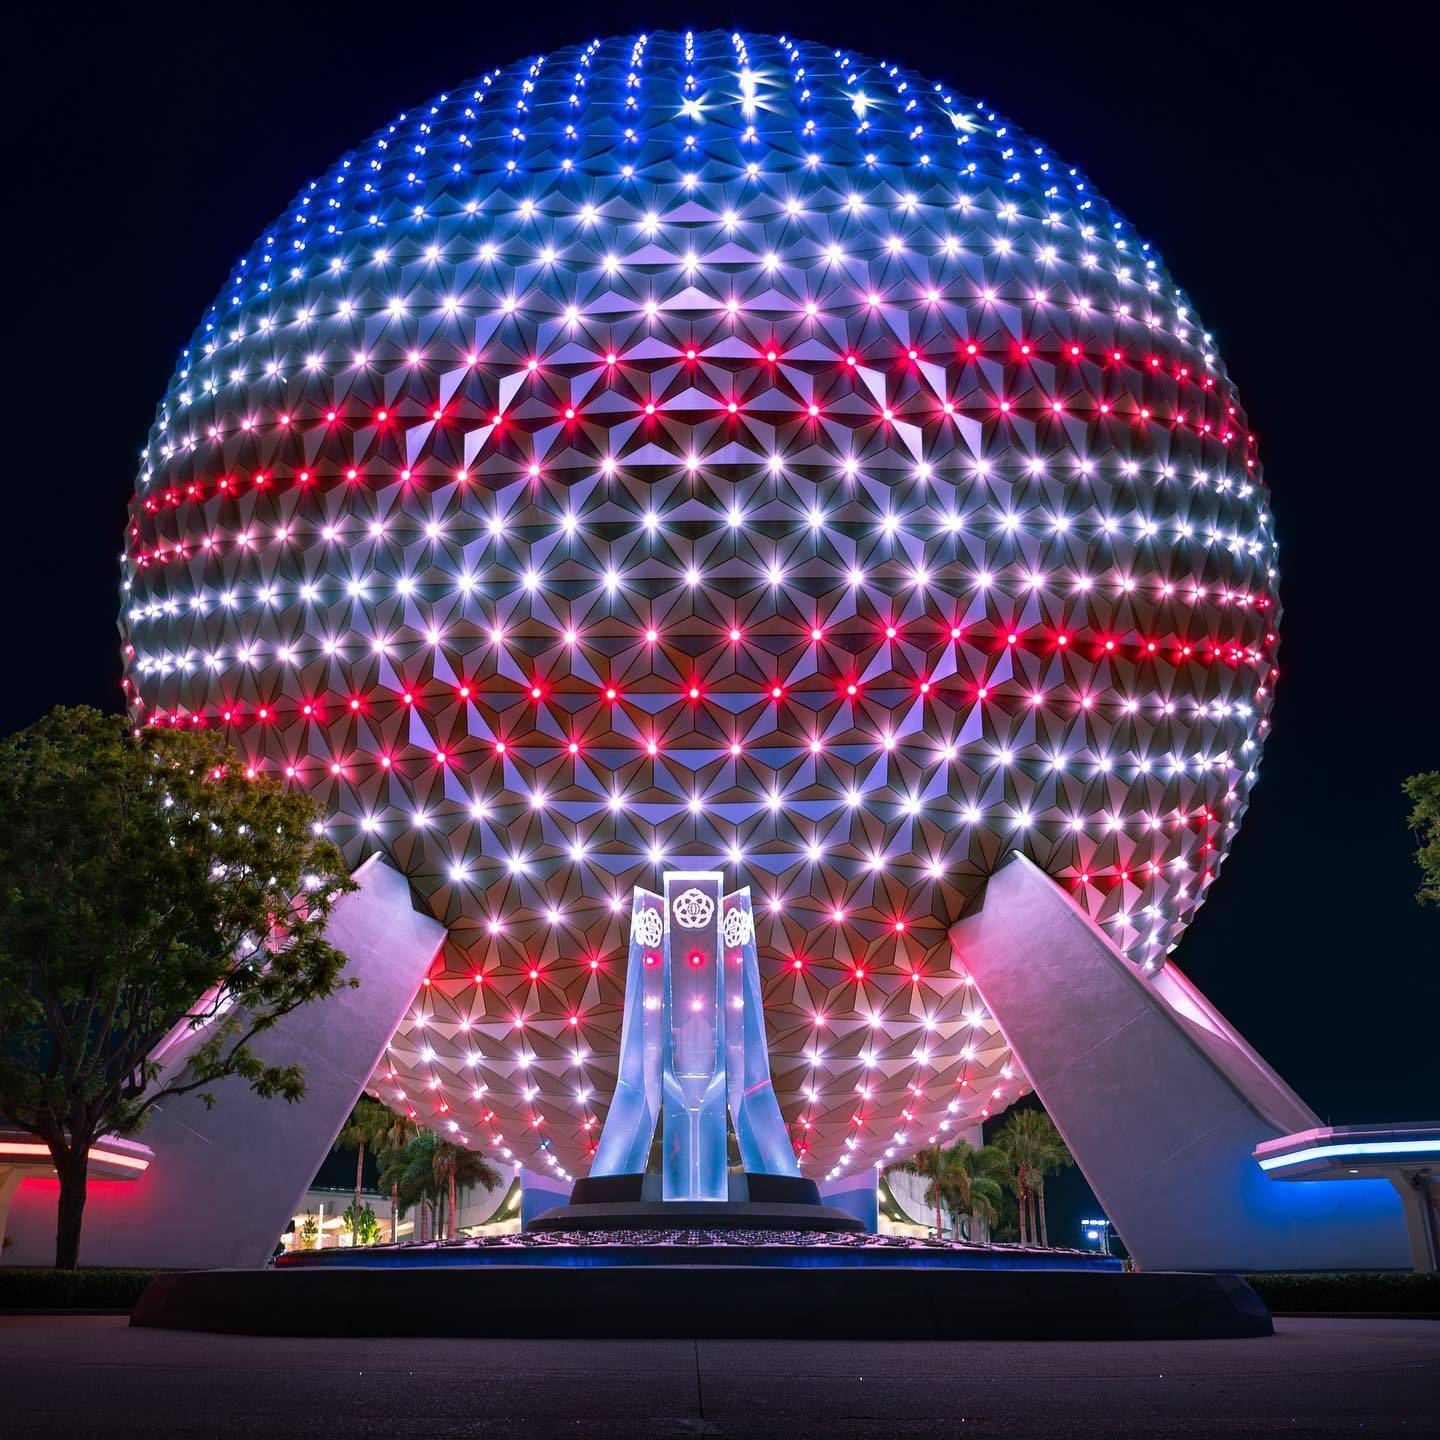 Spaceship Earth July 4 ambient lighting design